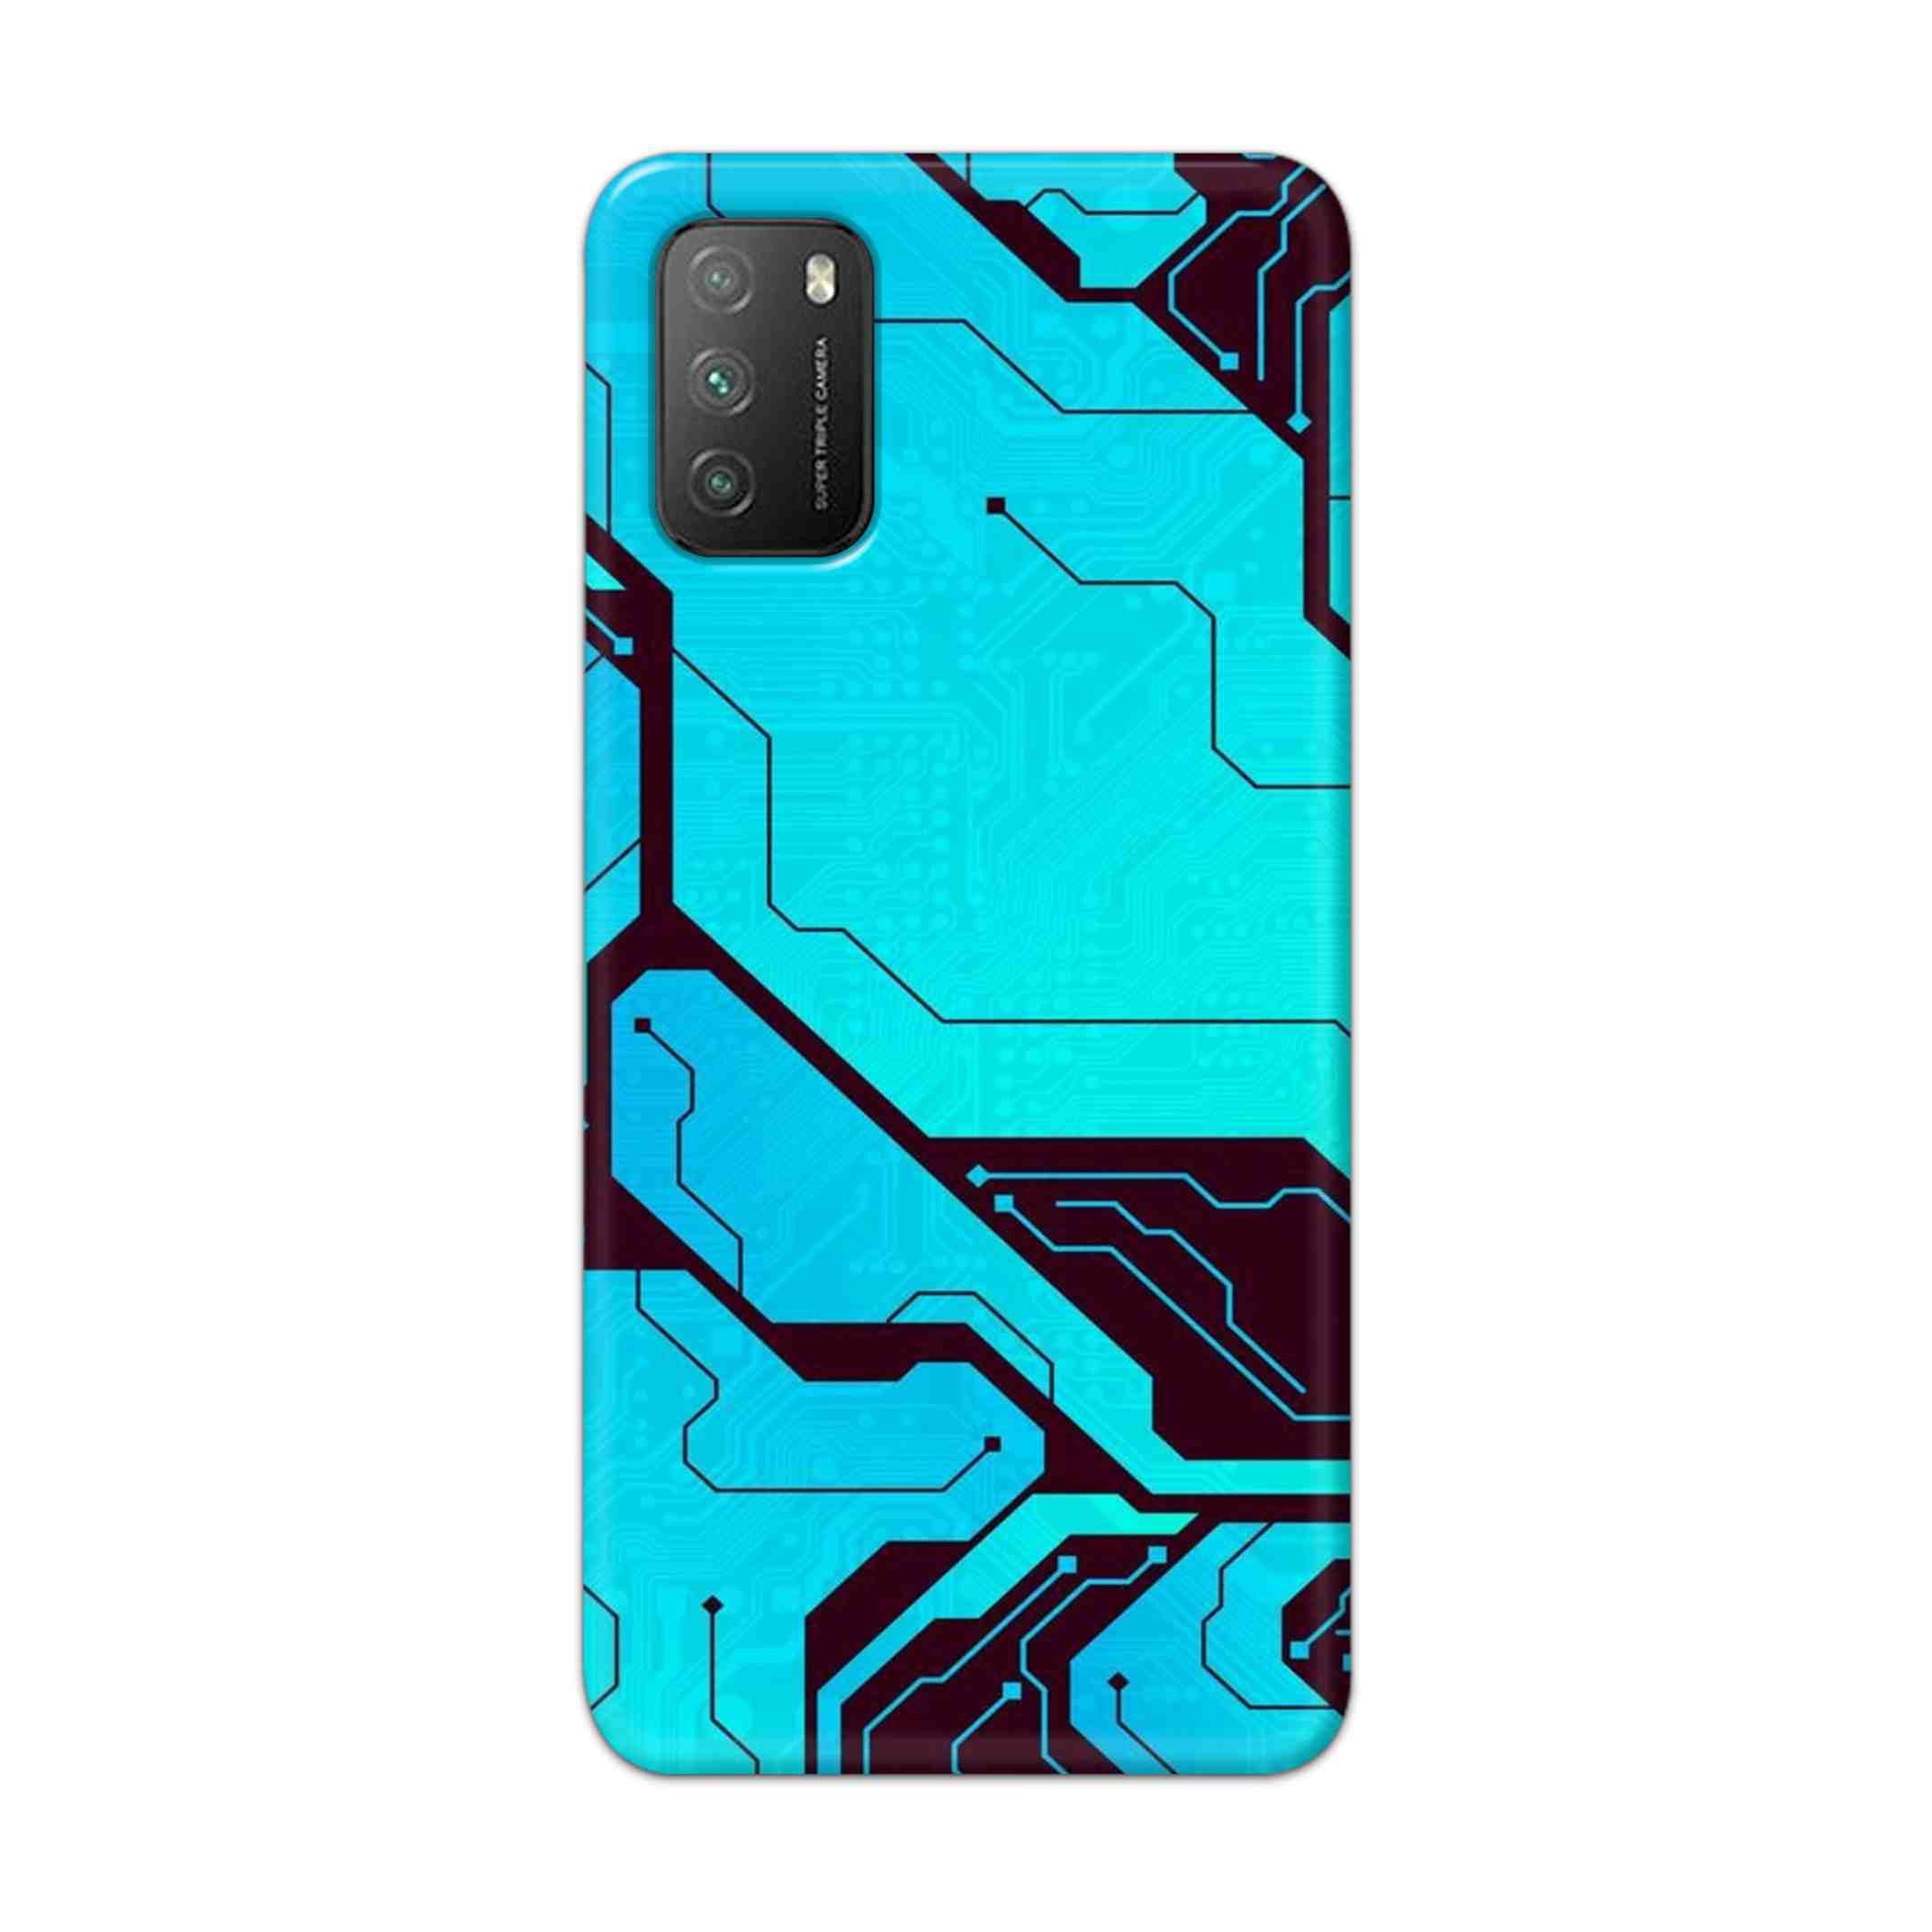 Buy Futuristic Line Hard Back Mobile Phone Case Cover For Poco M3 Online